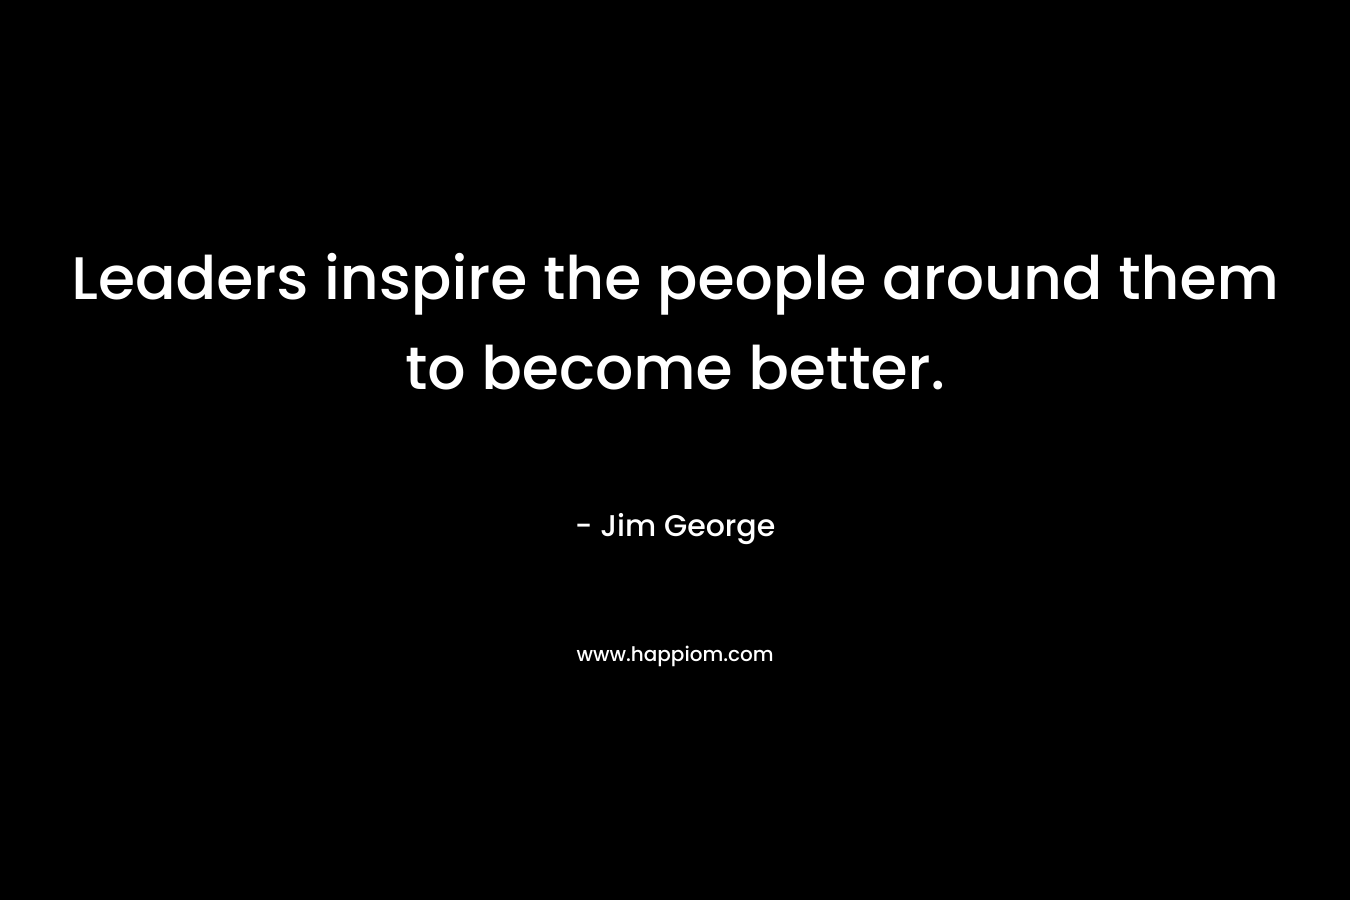 Leaders inspire the people around them to become better.